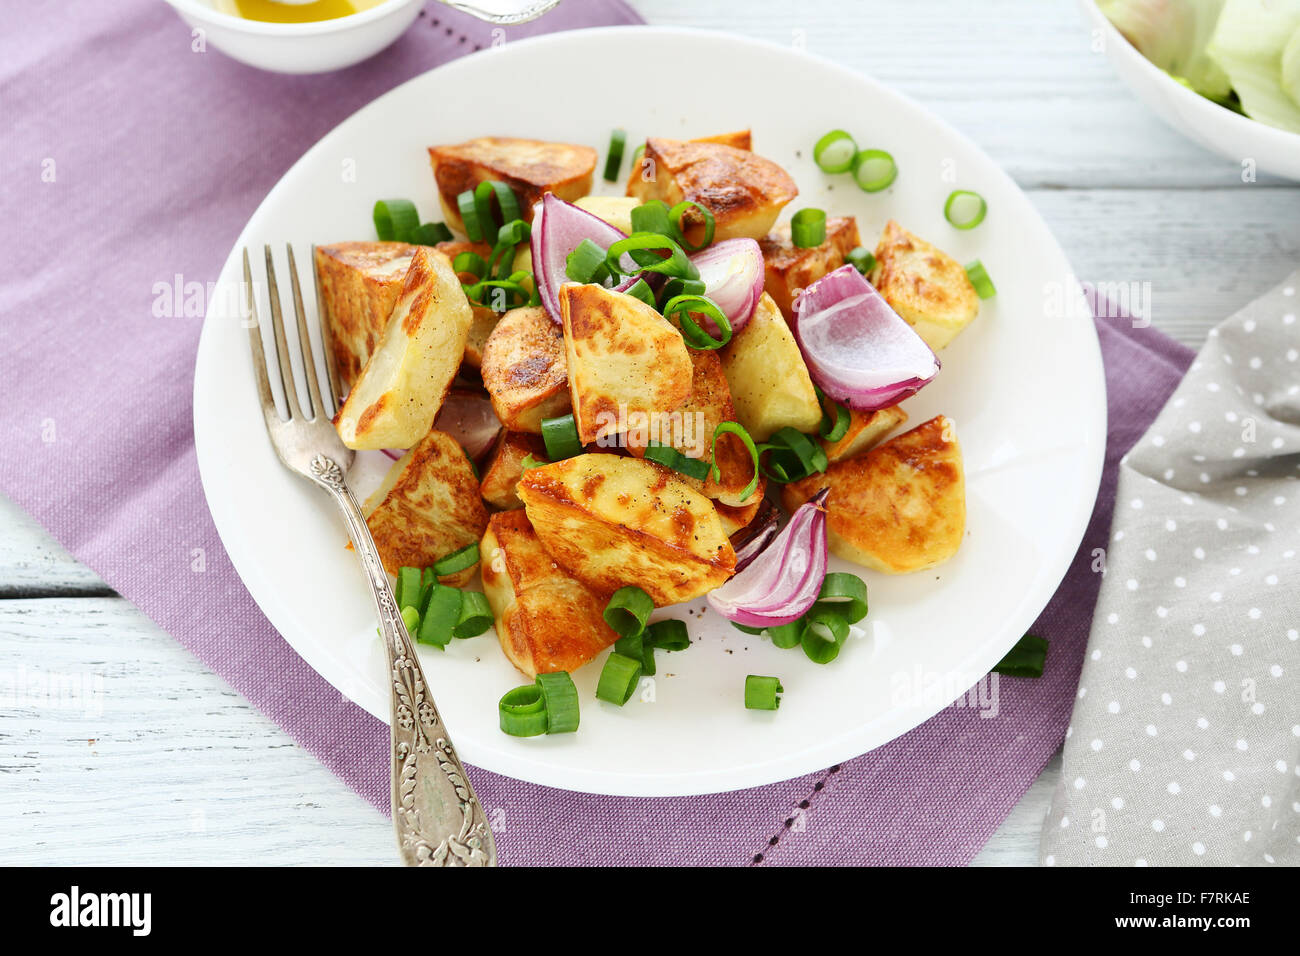 roasted potato wedges on plate, food close-up Stock Photo